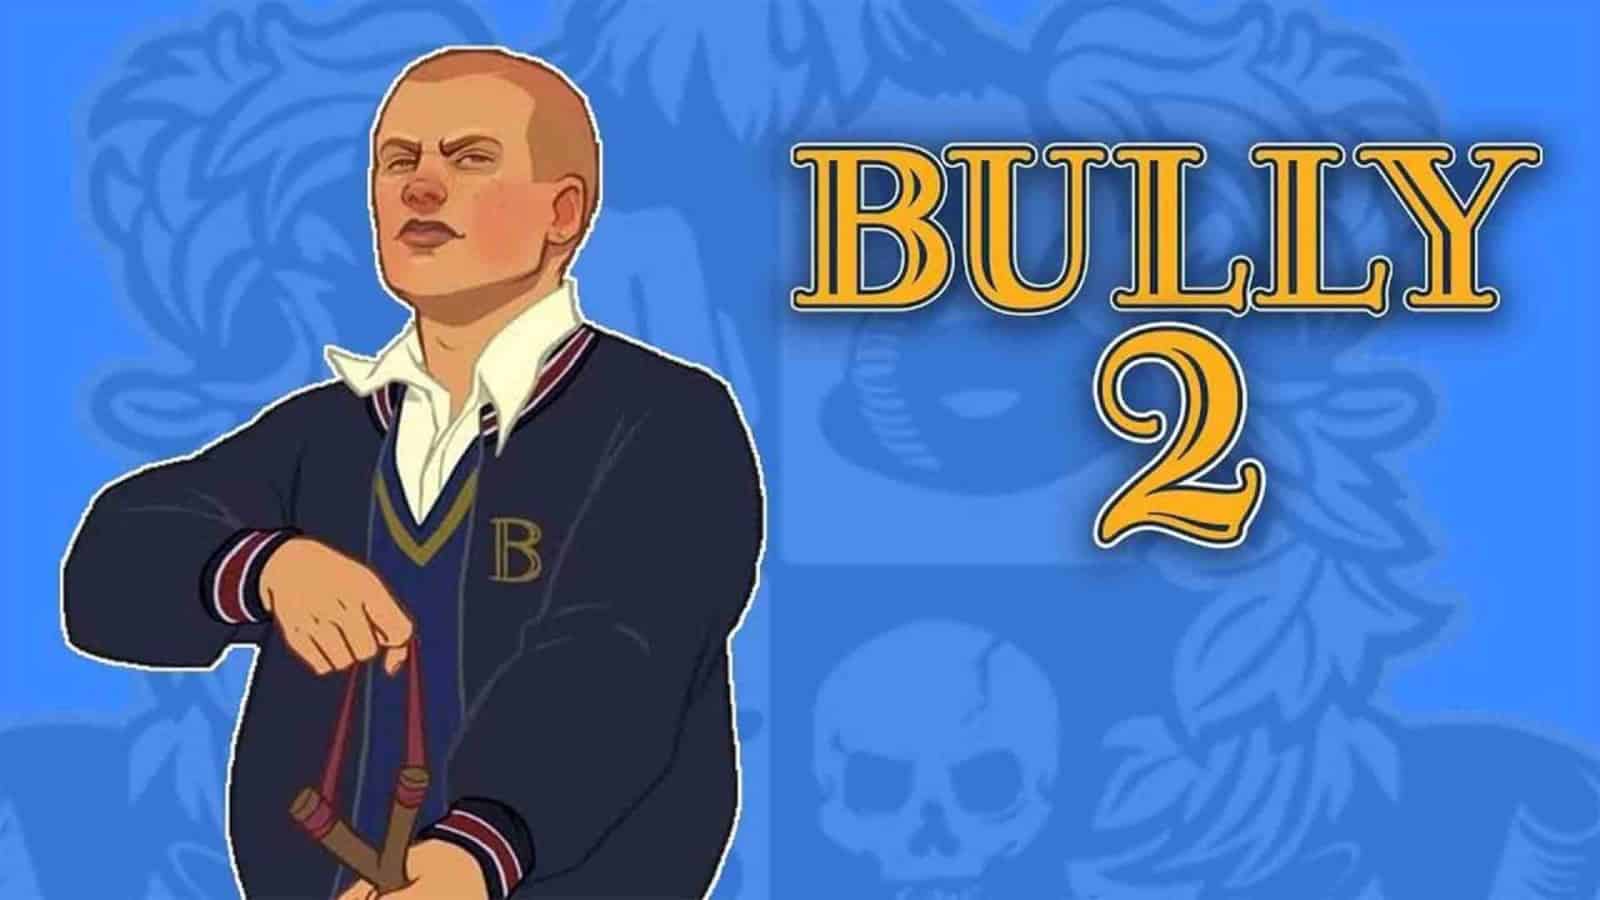 New Report With Rockstar Games Shares More Details On Bully 2 - mxdwn Games